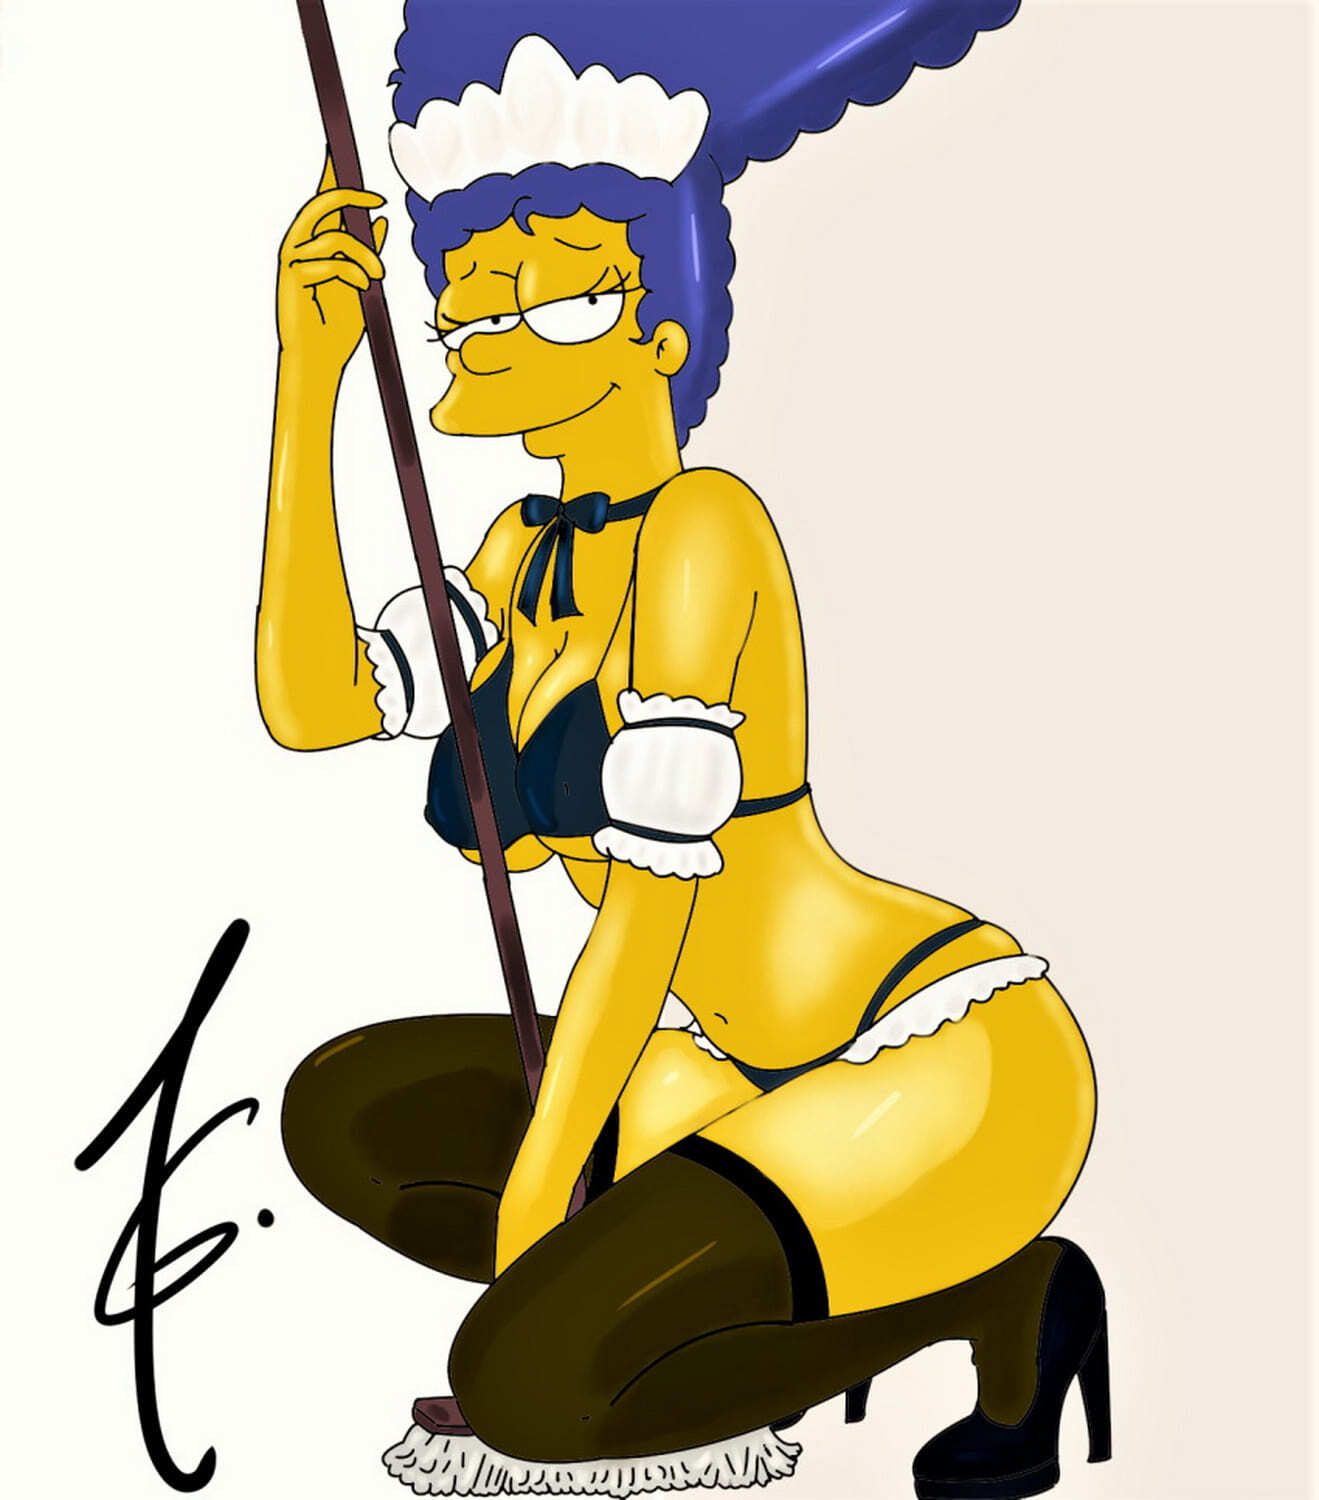 Slideshow marge simpson in stockings.